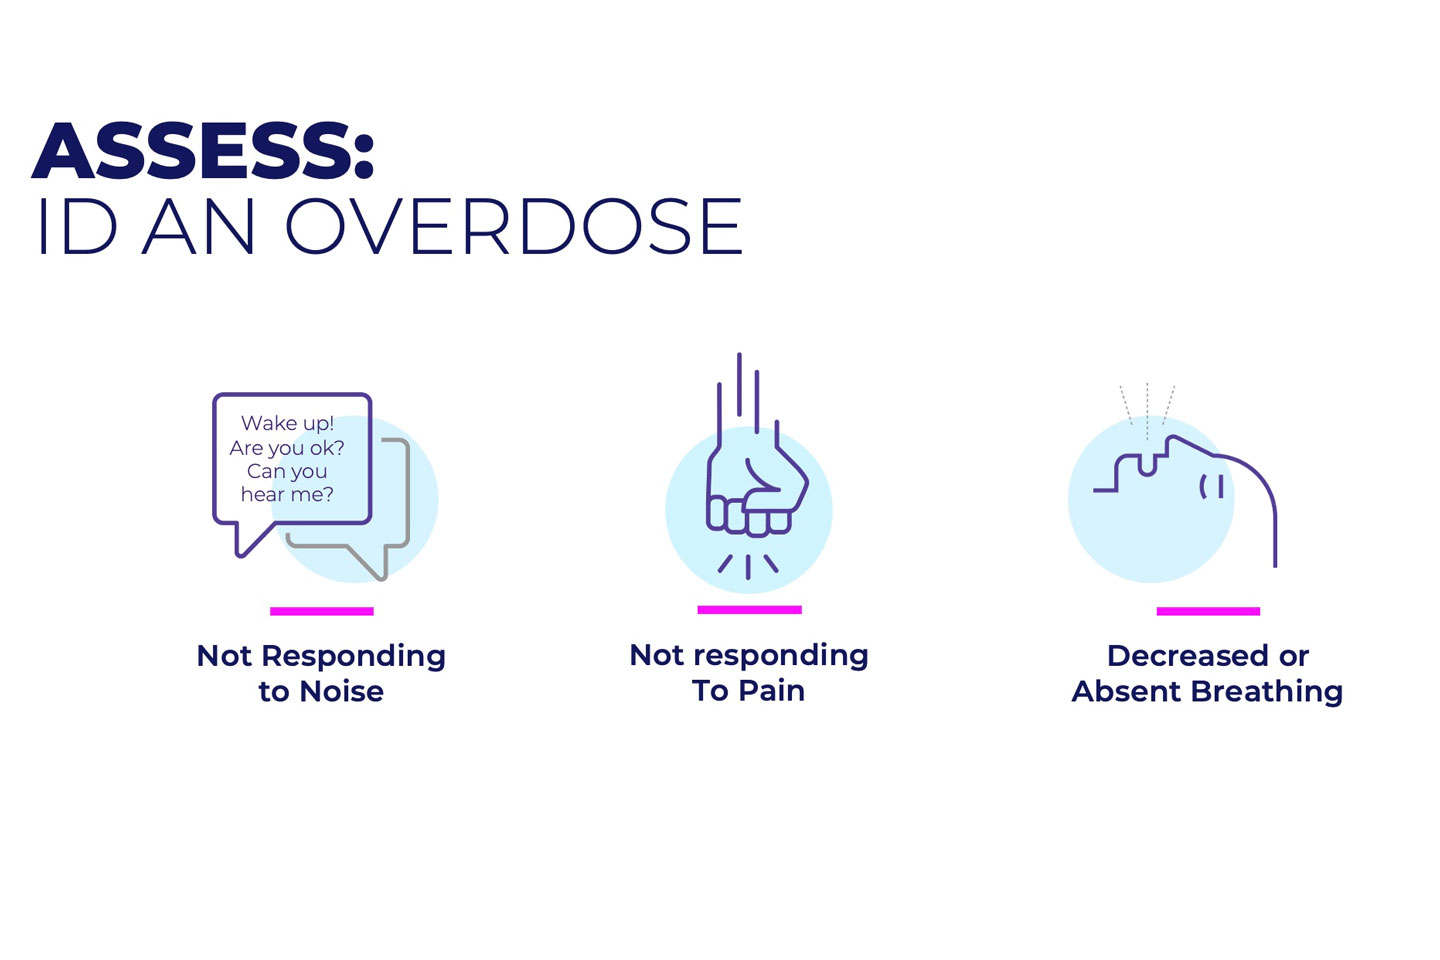 We teach learners the key steps for opioid overdose identification and response